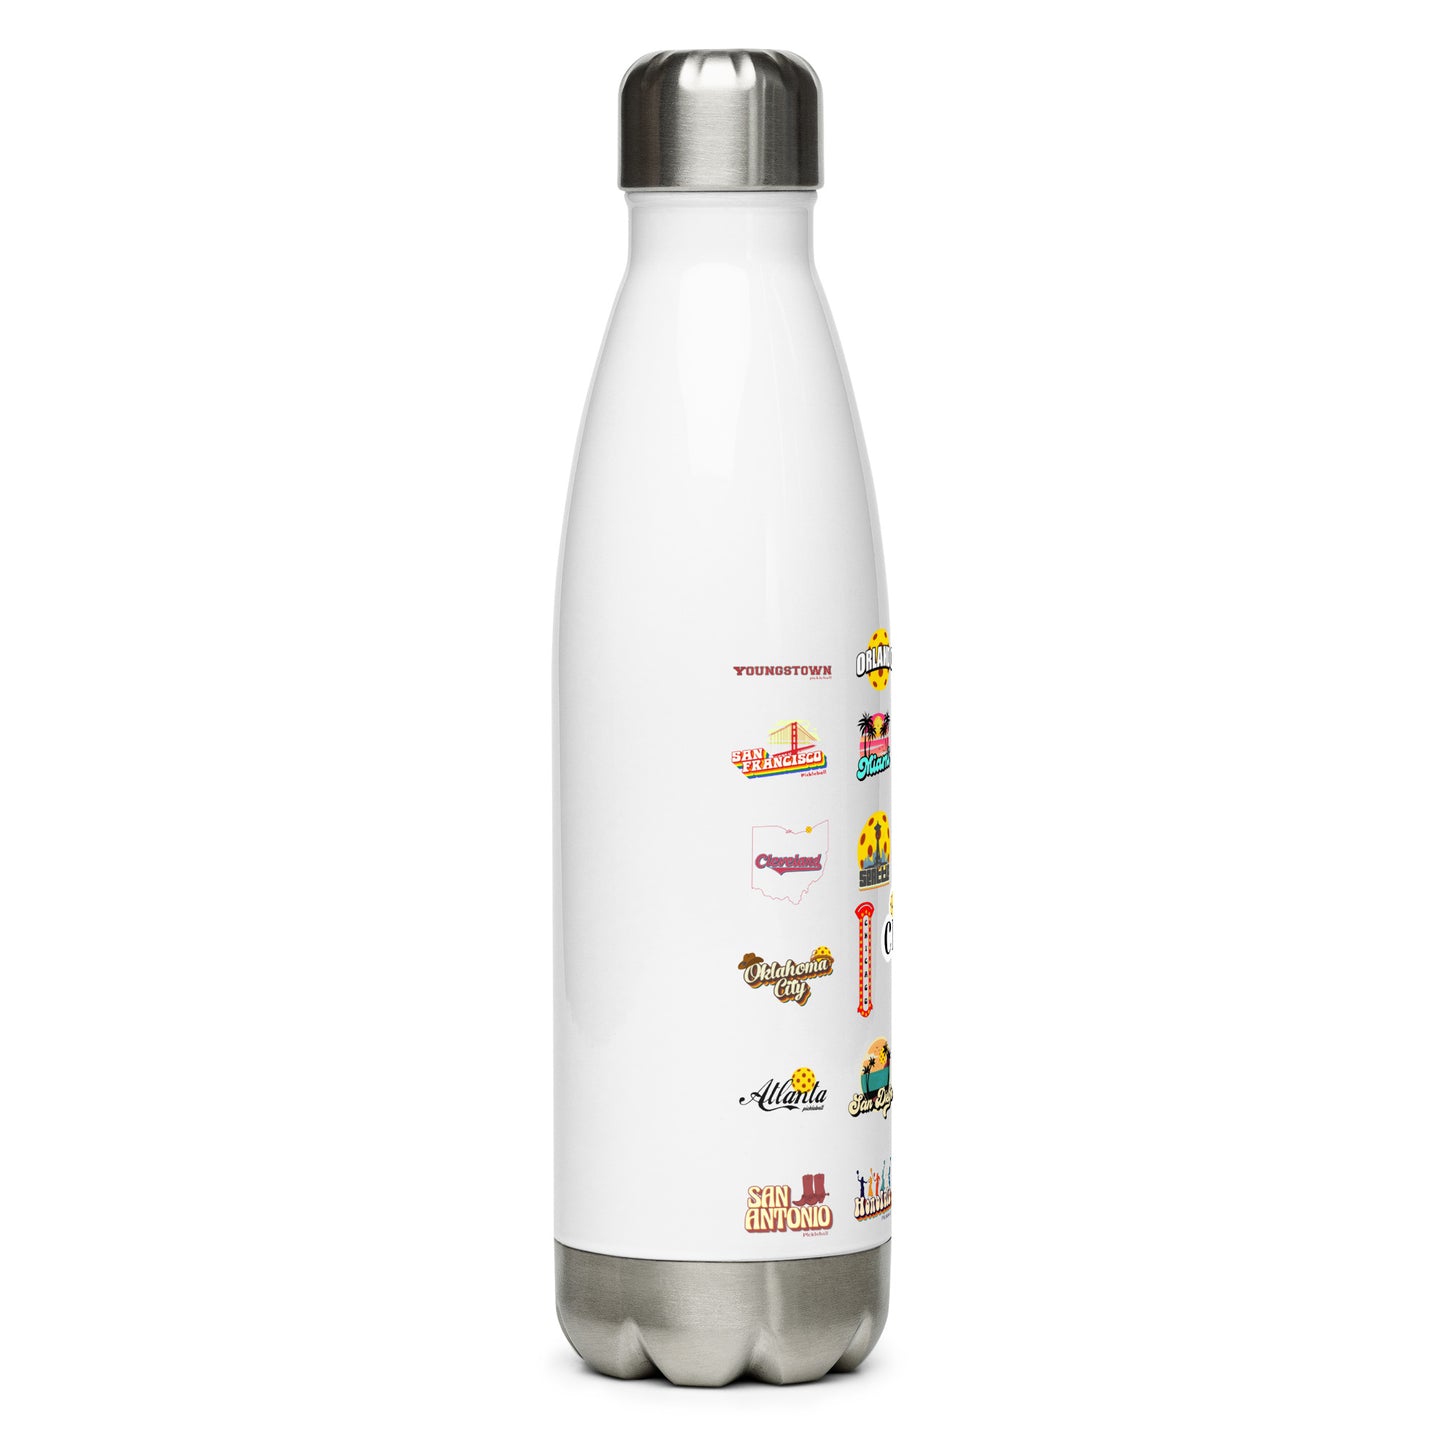 CITY STAINLESS STEEL WATER BOTTLE